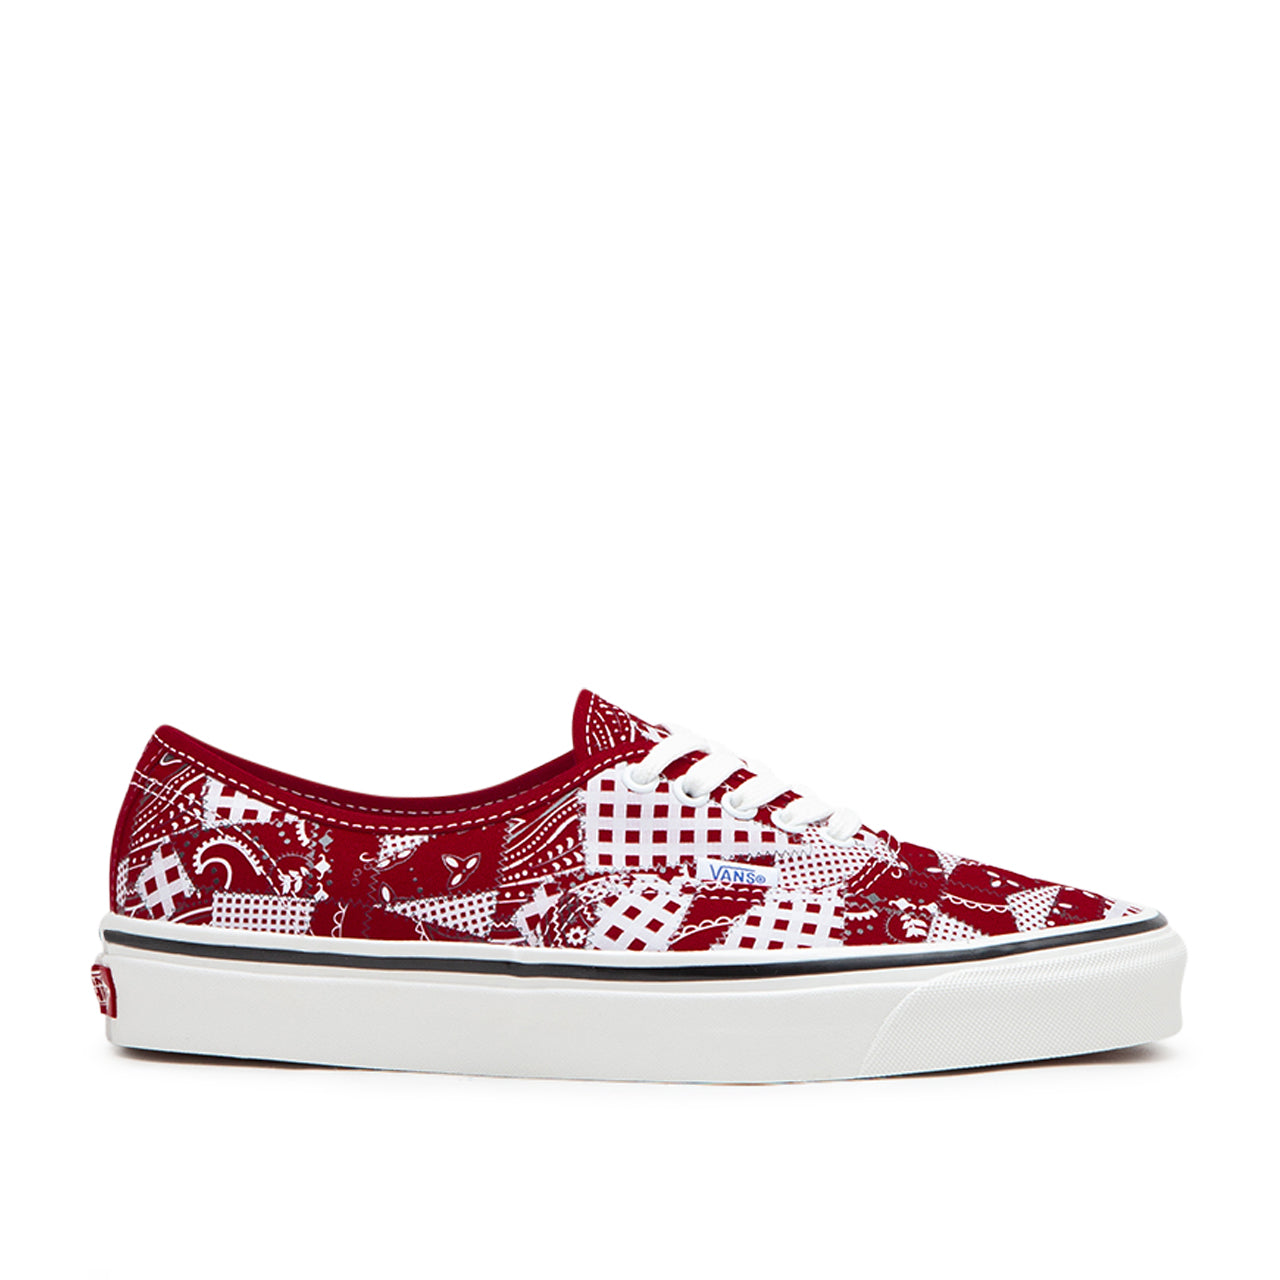 Vans UA Authentic 44DX Anaheim Factory WP (Rot / Weiß)  - Allike Store